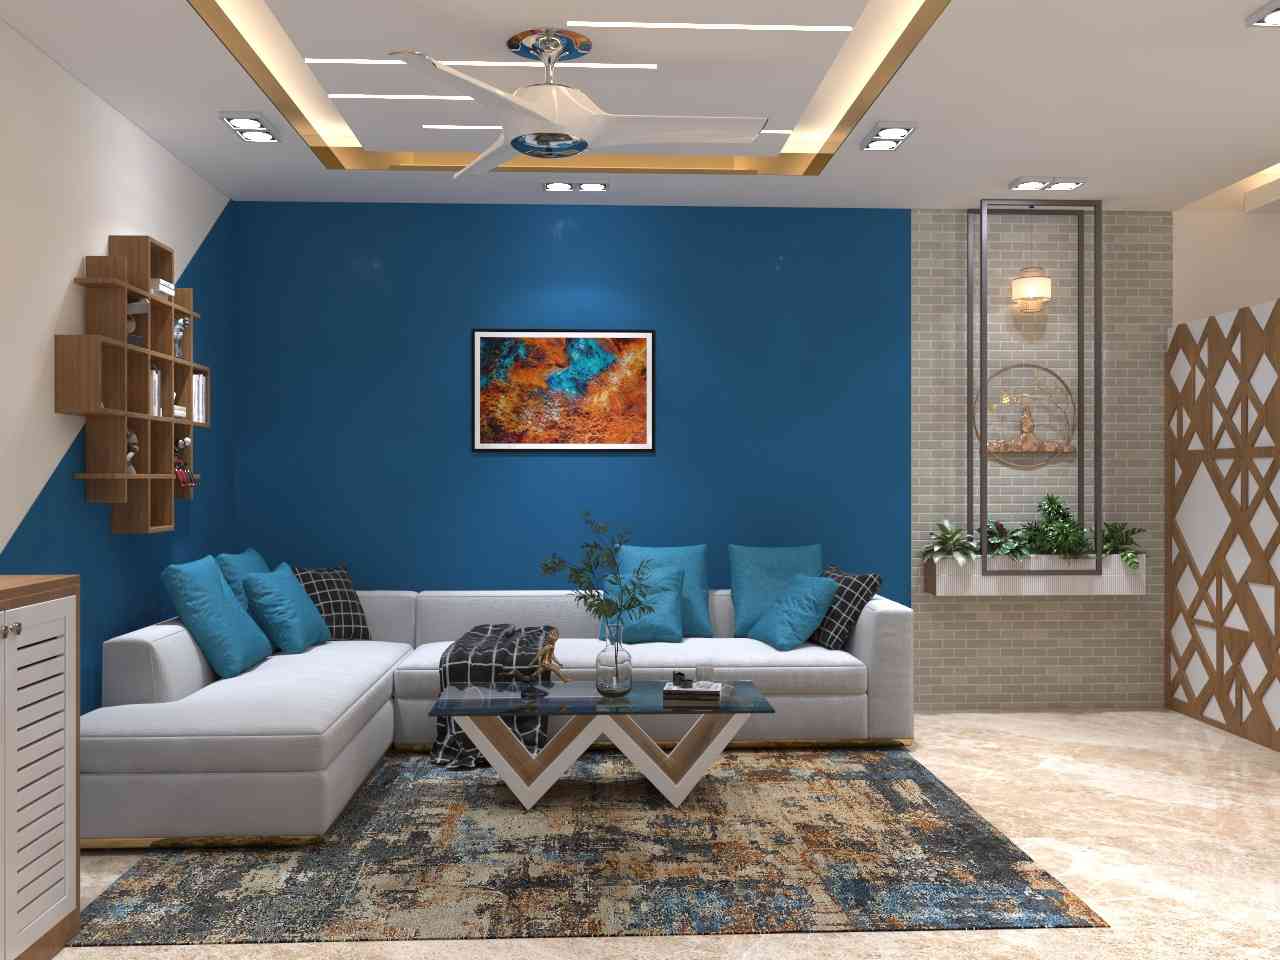 Contemporary Modern Living Room Design With Blue Walls